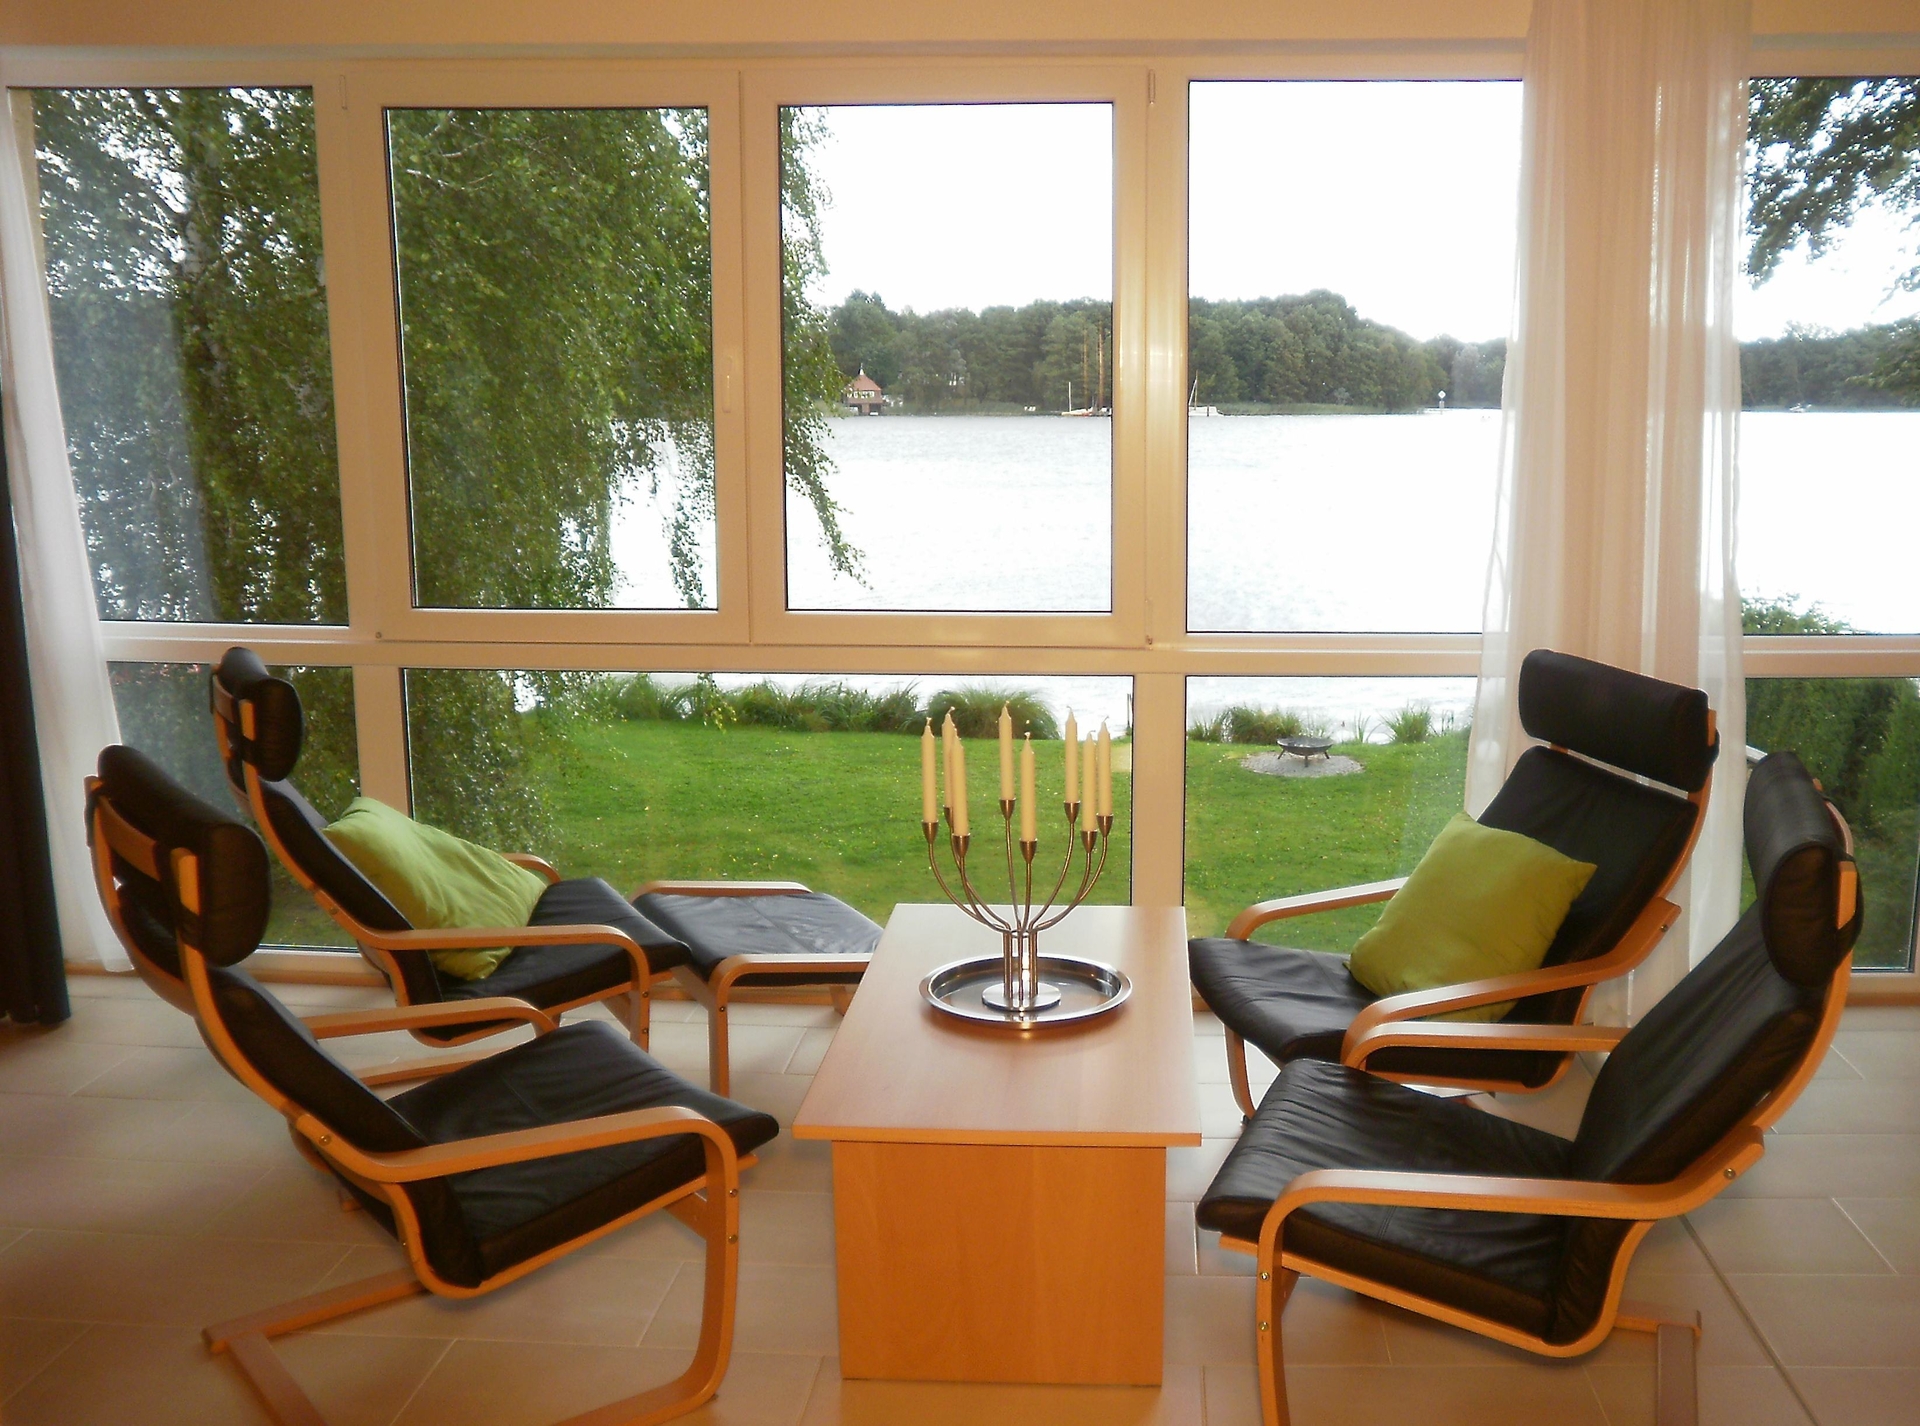 Bild: In the living area of this apartment there is a leather-covered seating area with coffee table and panoramic view of the lake.